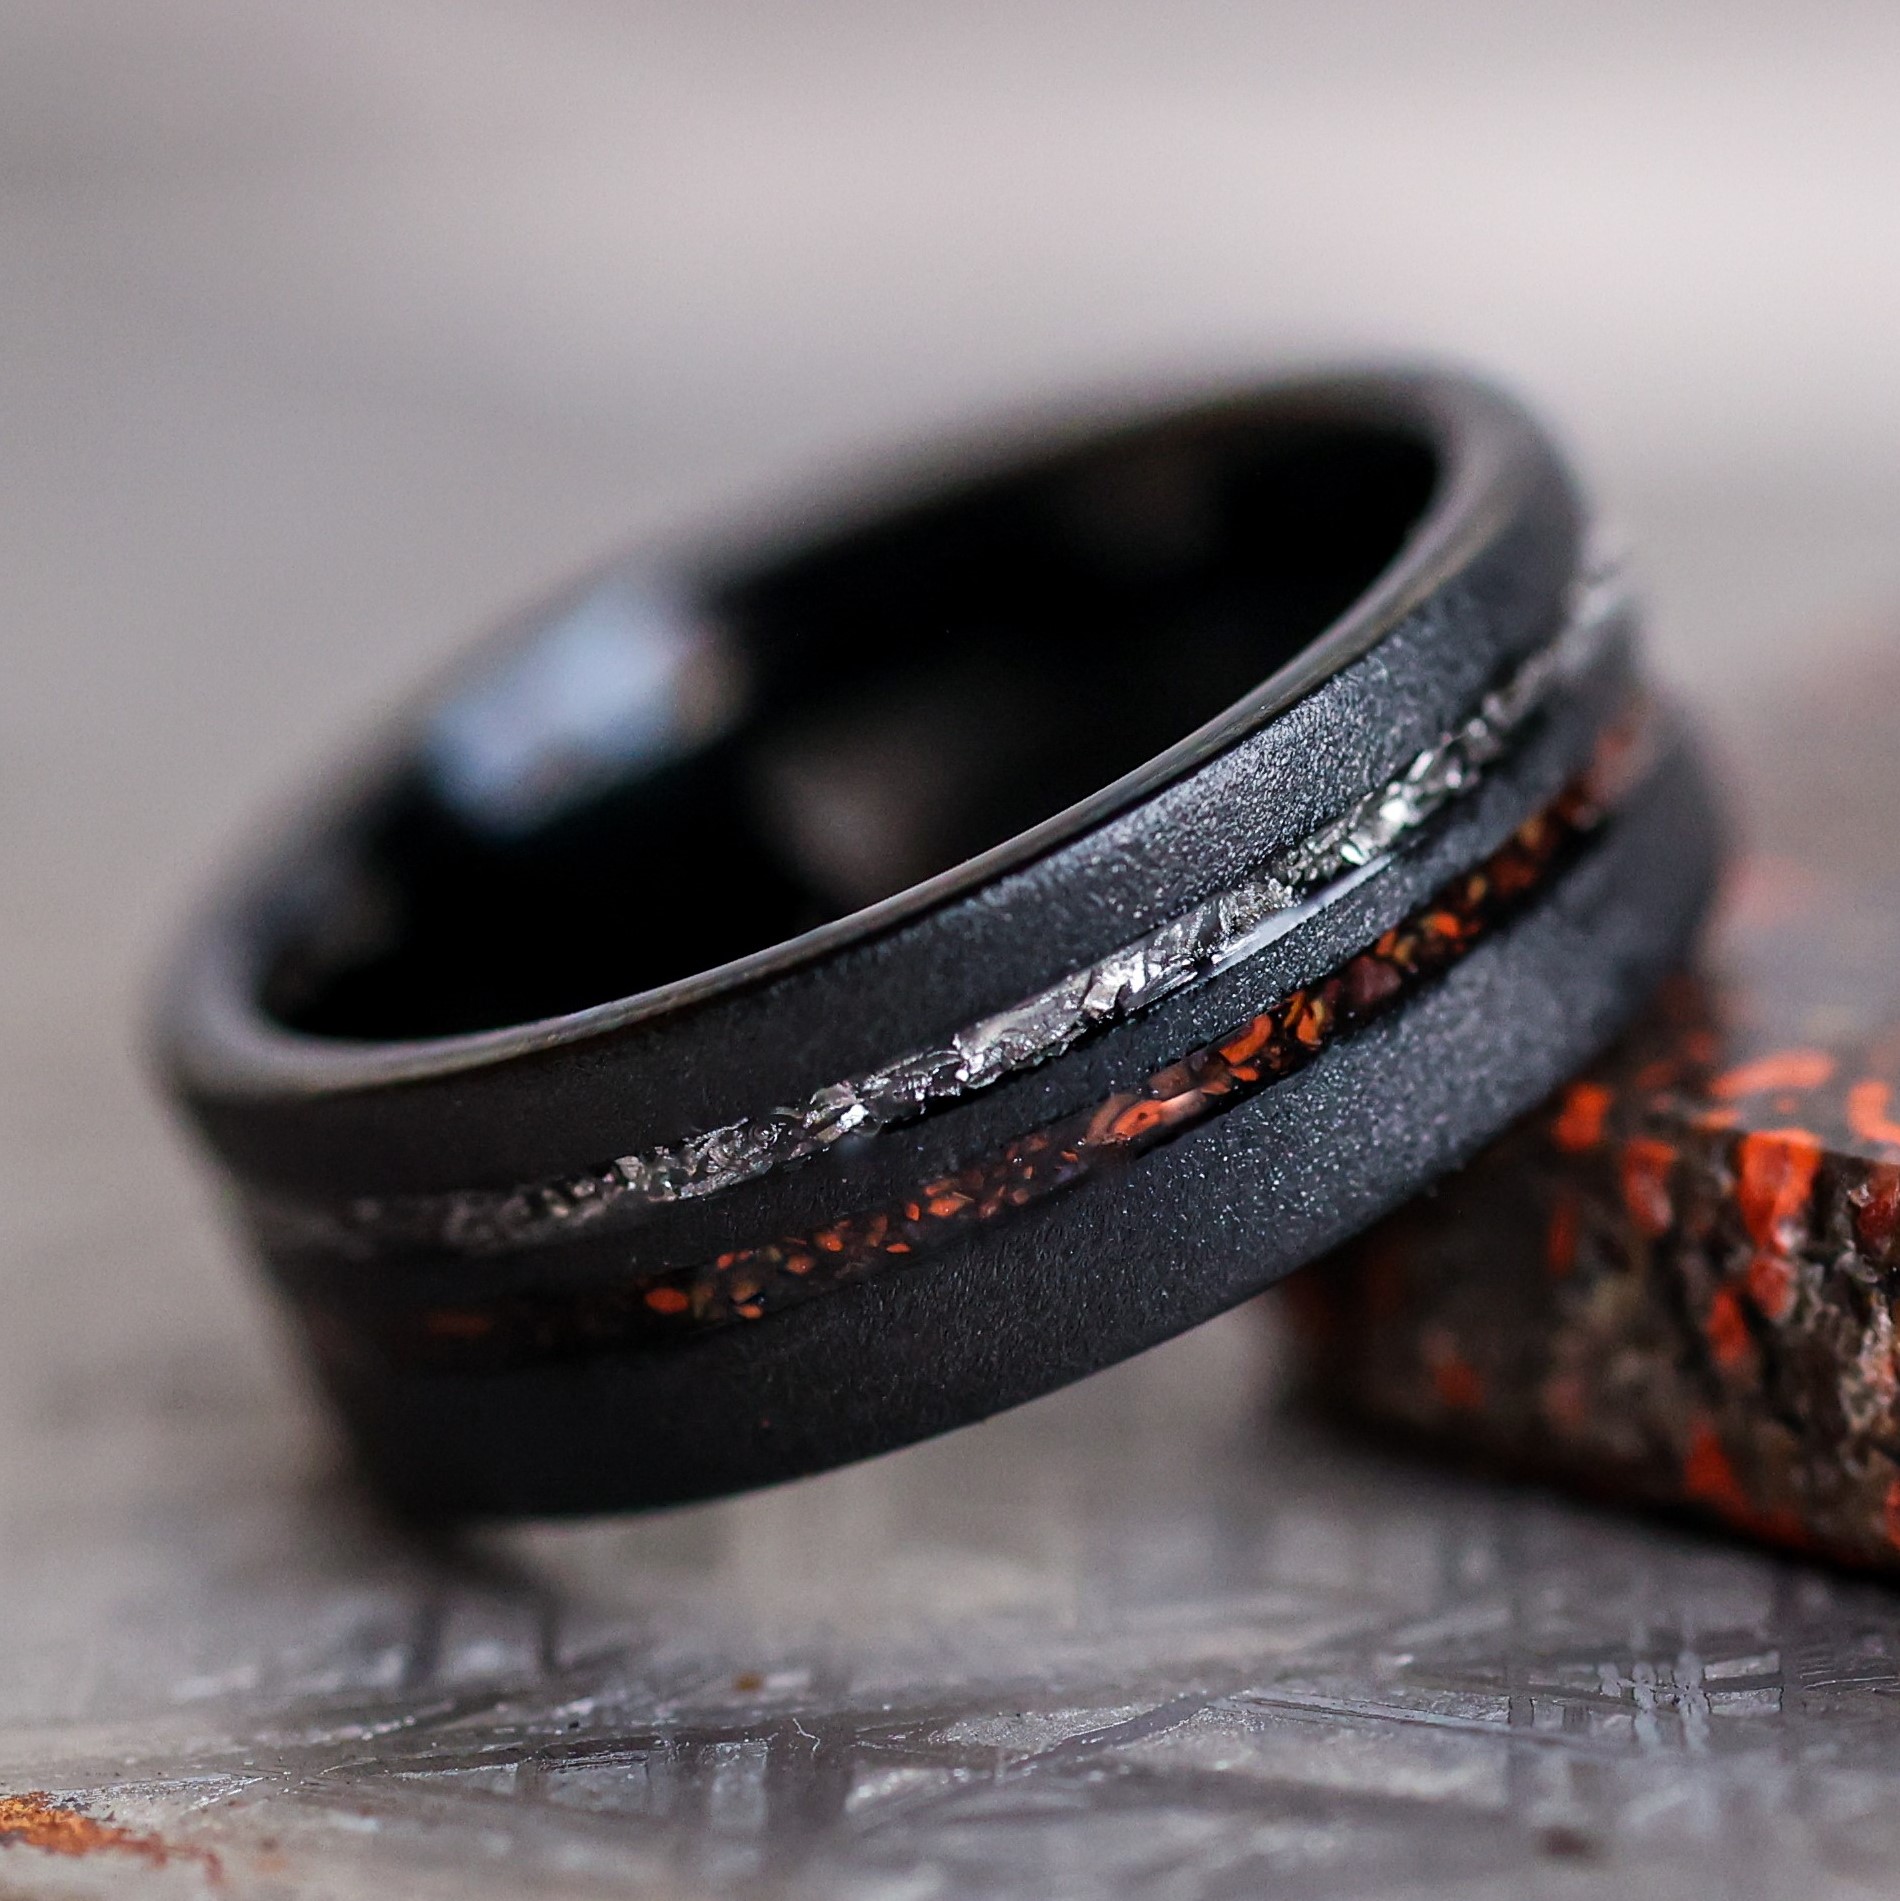 Wedding ring Experts, Thorum Releases The Meteorsaur; New Wedding Ring Crafted with 4 Billion Year Old Meteorite